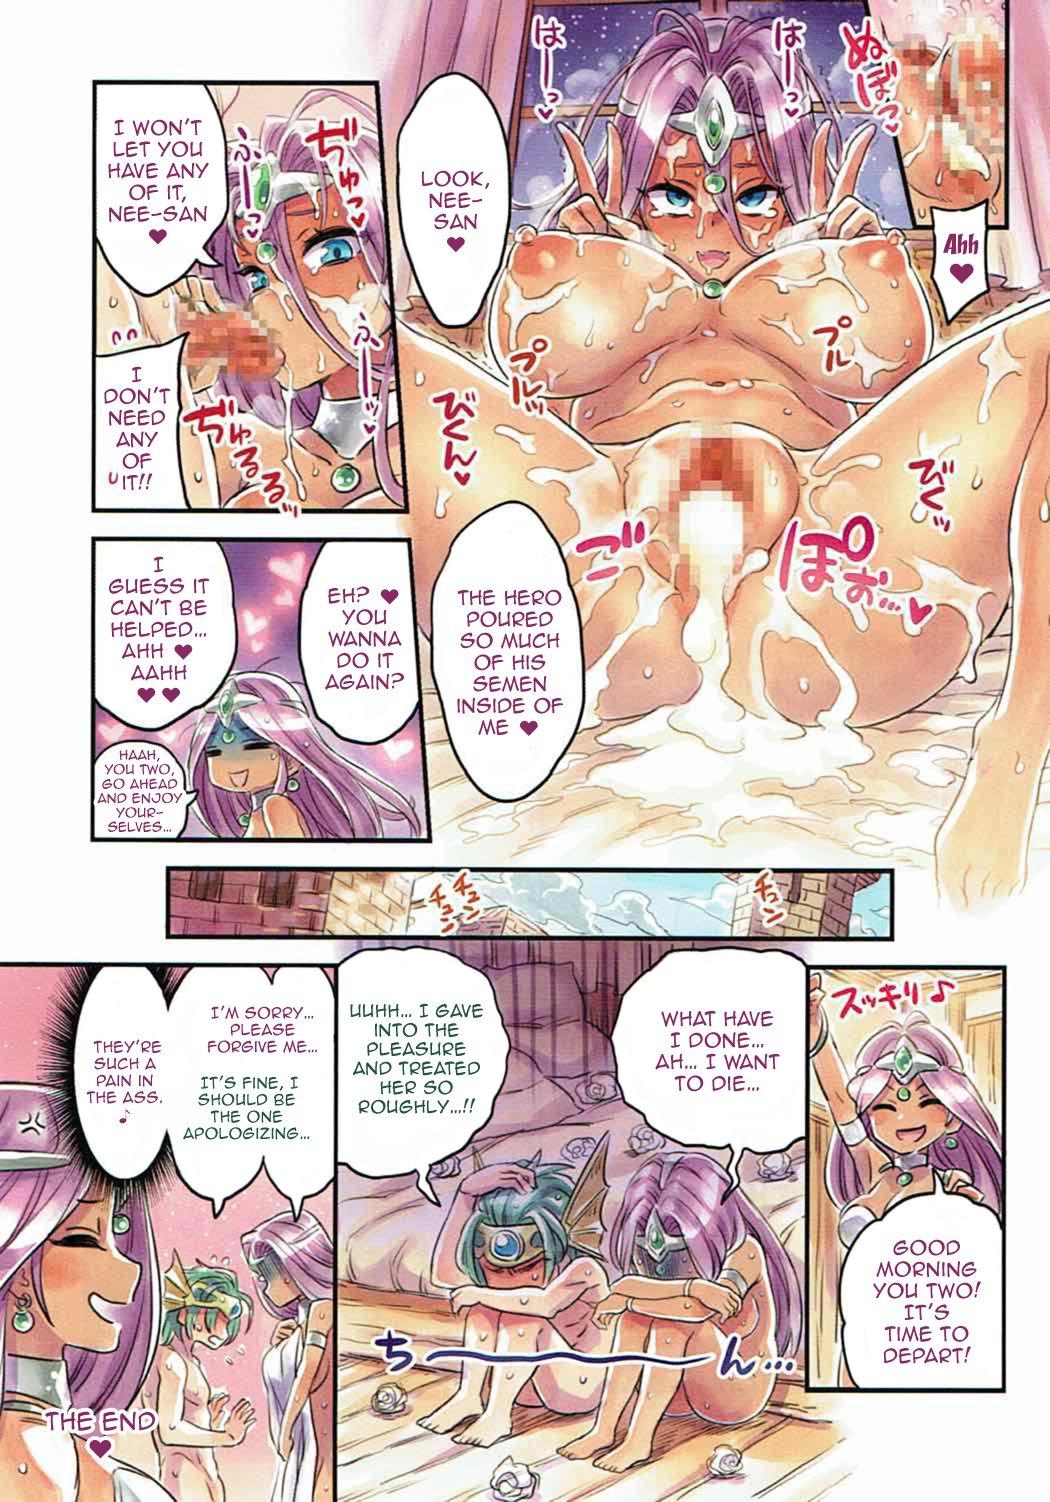 (C89) [Mimoneland (Mimonel)] Nakama to Issen Koechau Hon ~DQ Hen~ | A Book About Crossing The Line With Companions ~DQ Edition~ (Dragon Quest) [English] {Doujins.com} 8